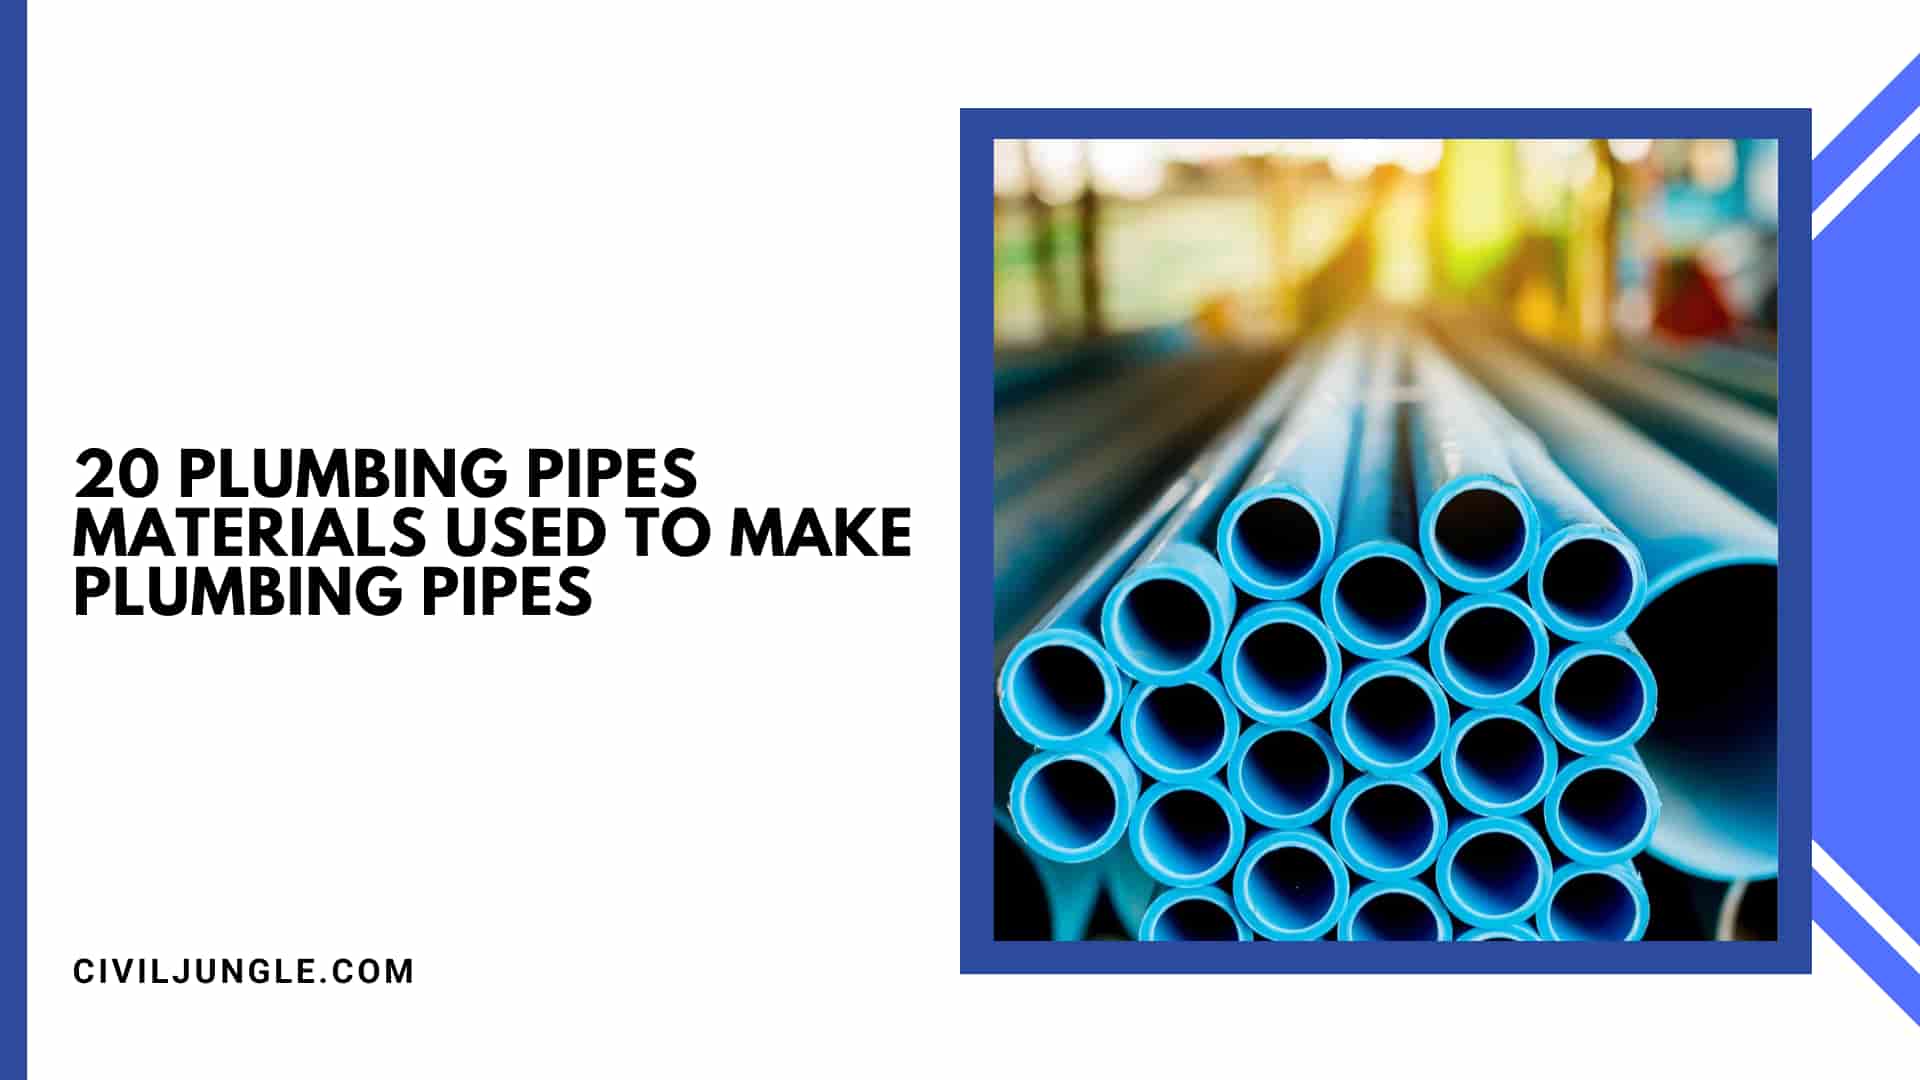 20 Plumbing Pipes Materials Used to Make Plumbing Pipes